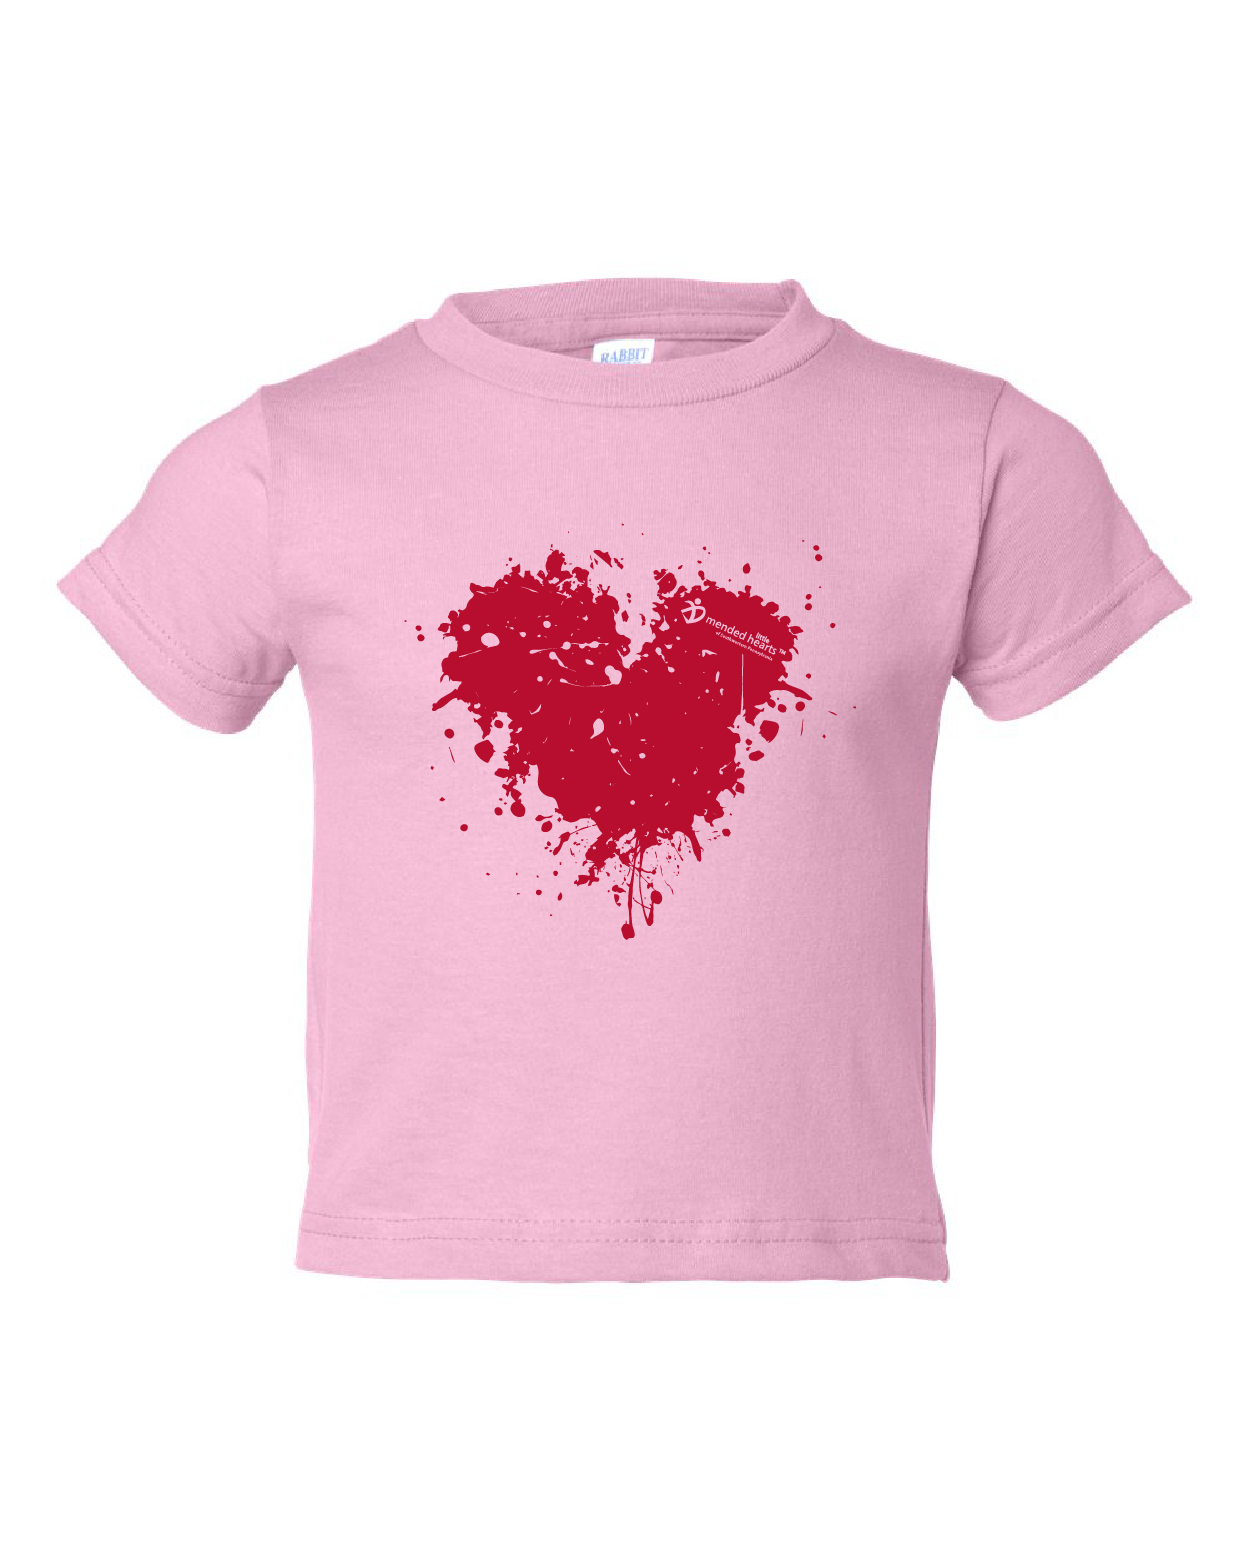 Splatter Heart Toddler Shirts Available in Multiple Colors